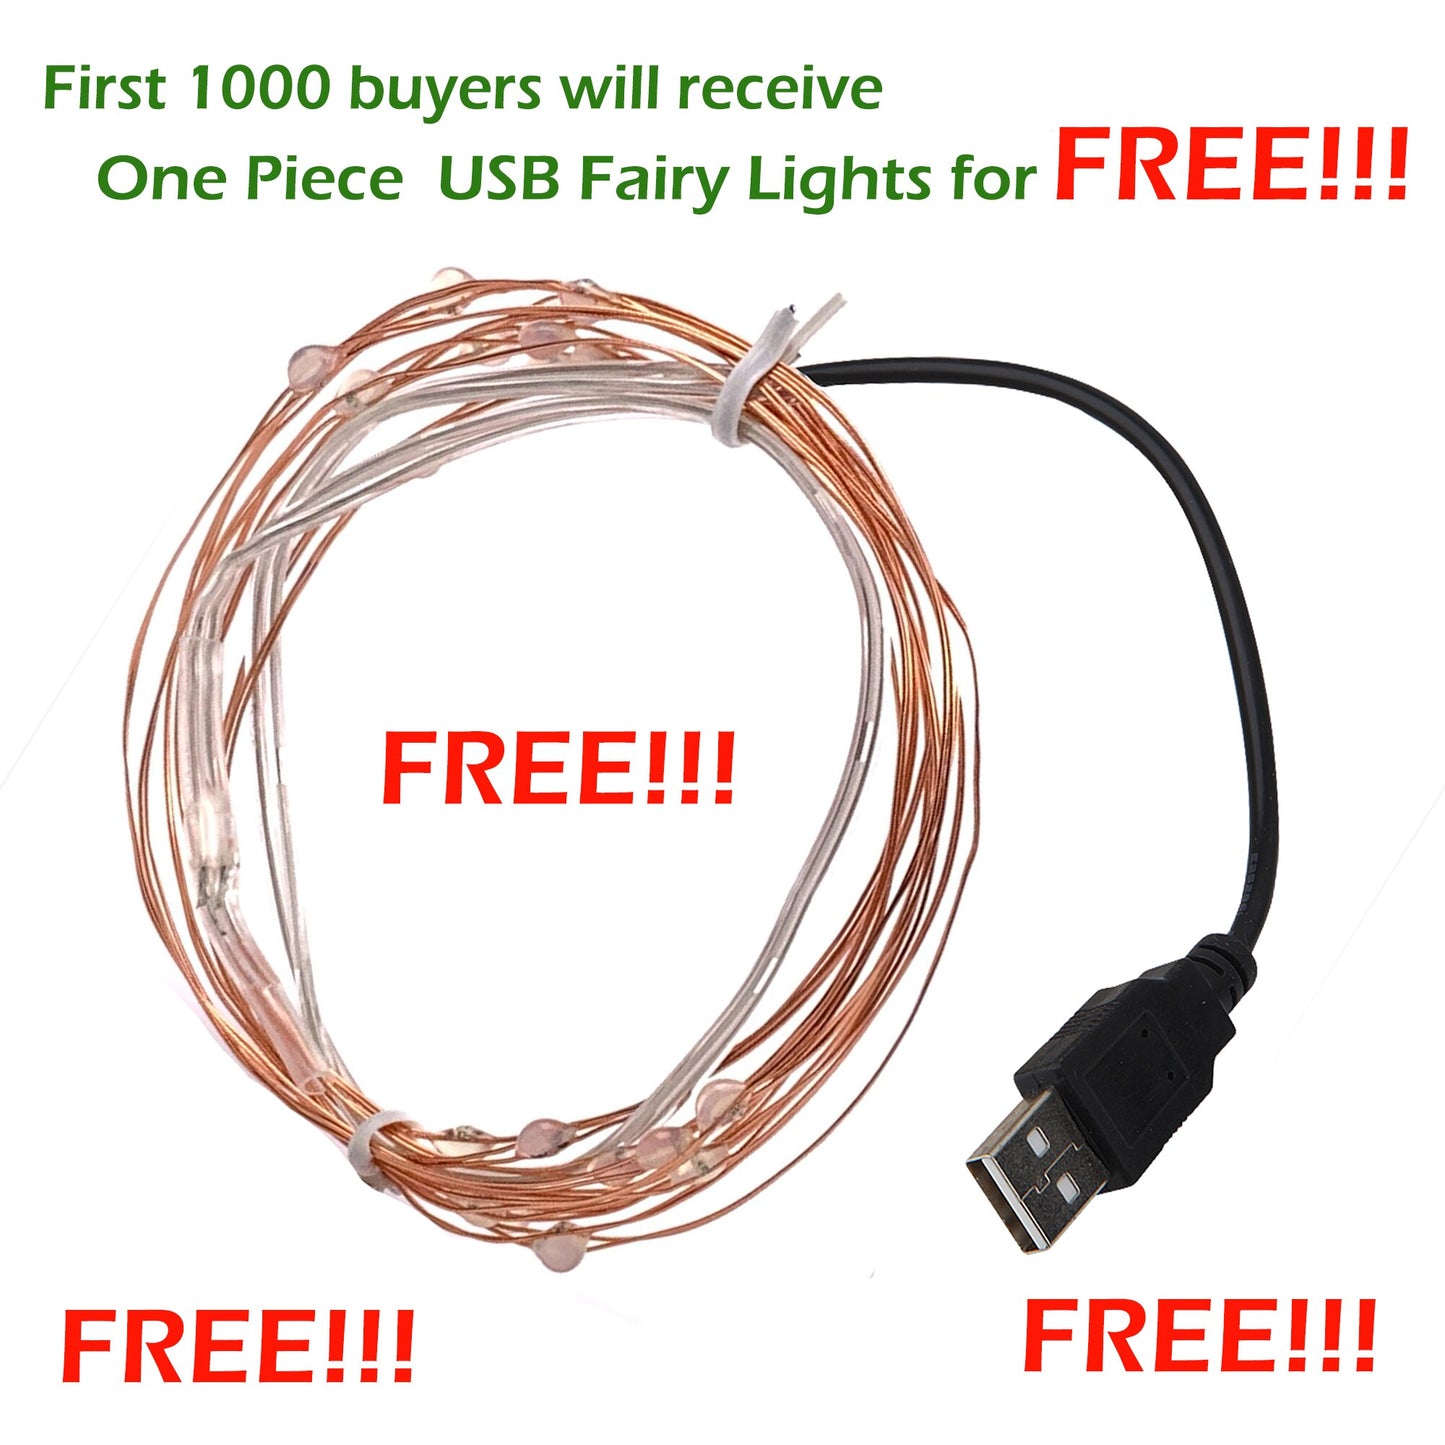 First 1000 buyers will receive One Piece USB Fairy Lights for FREE